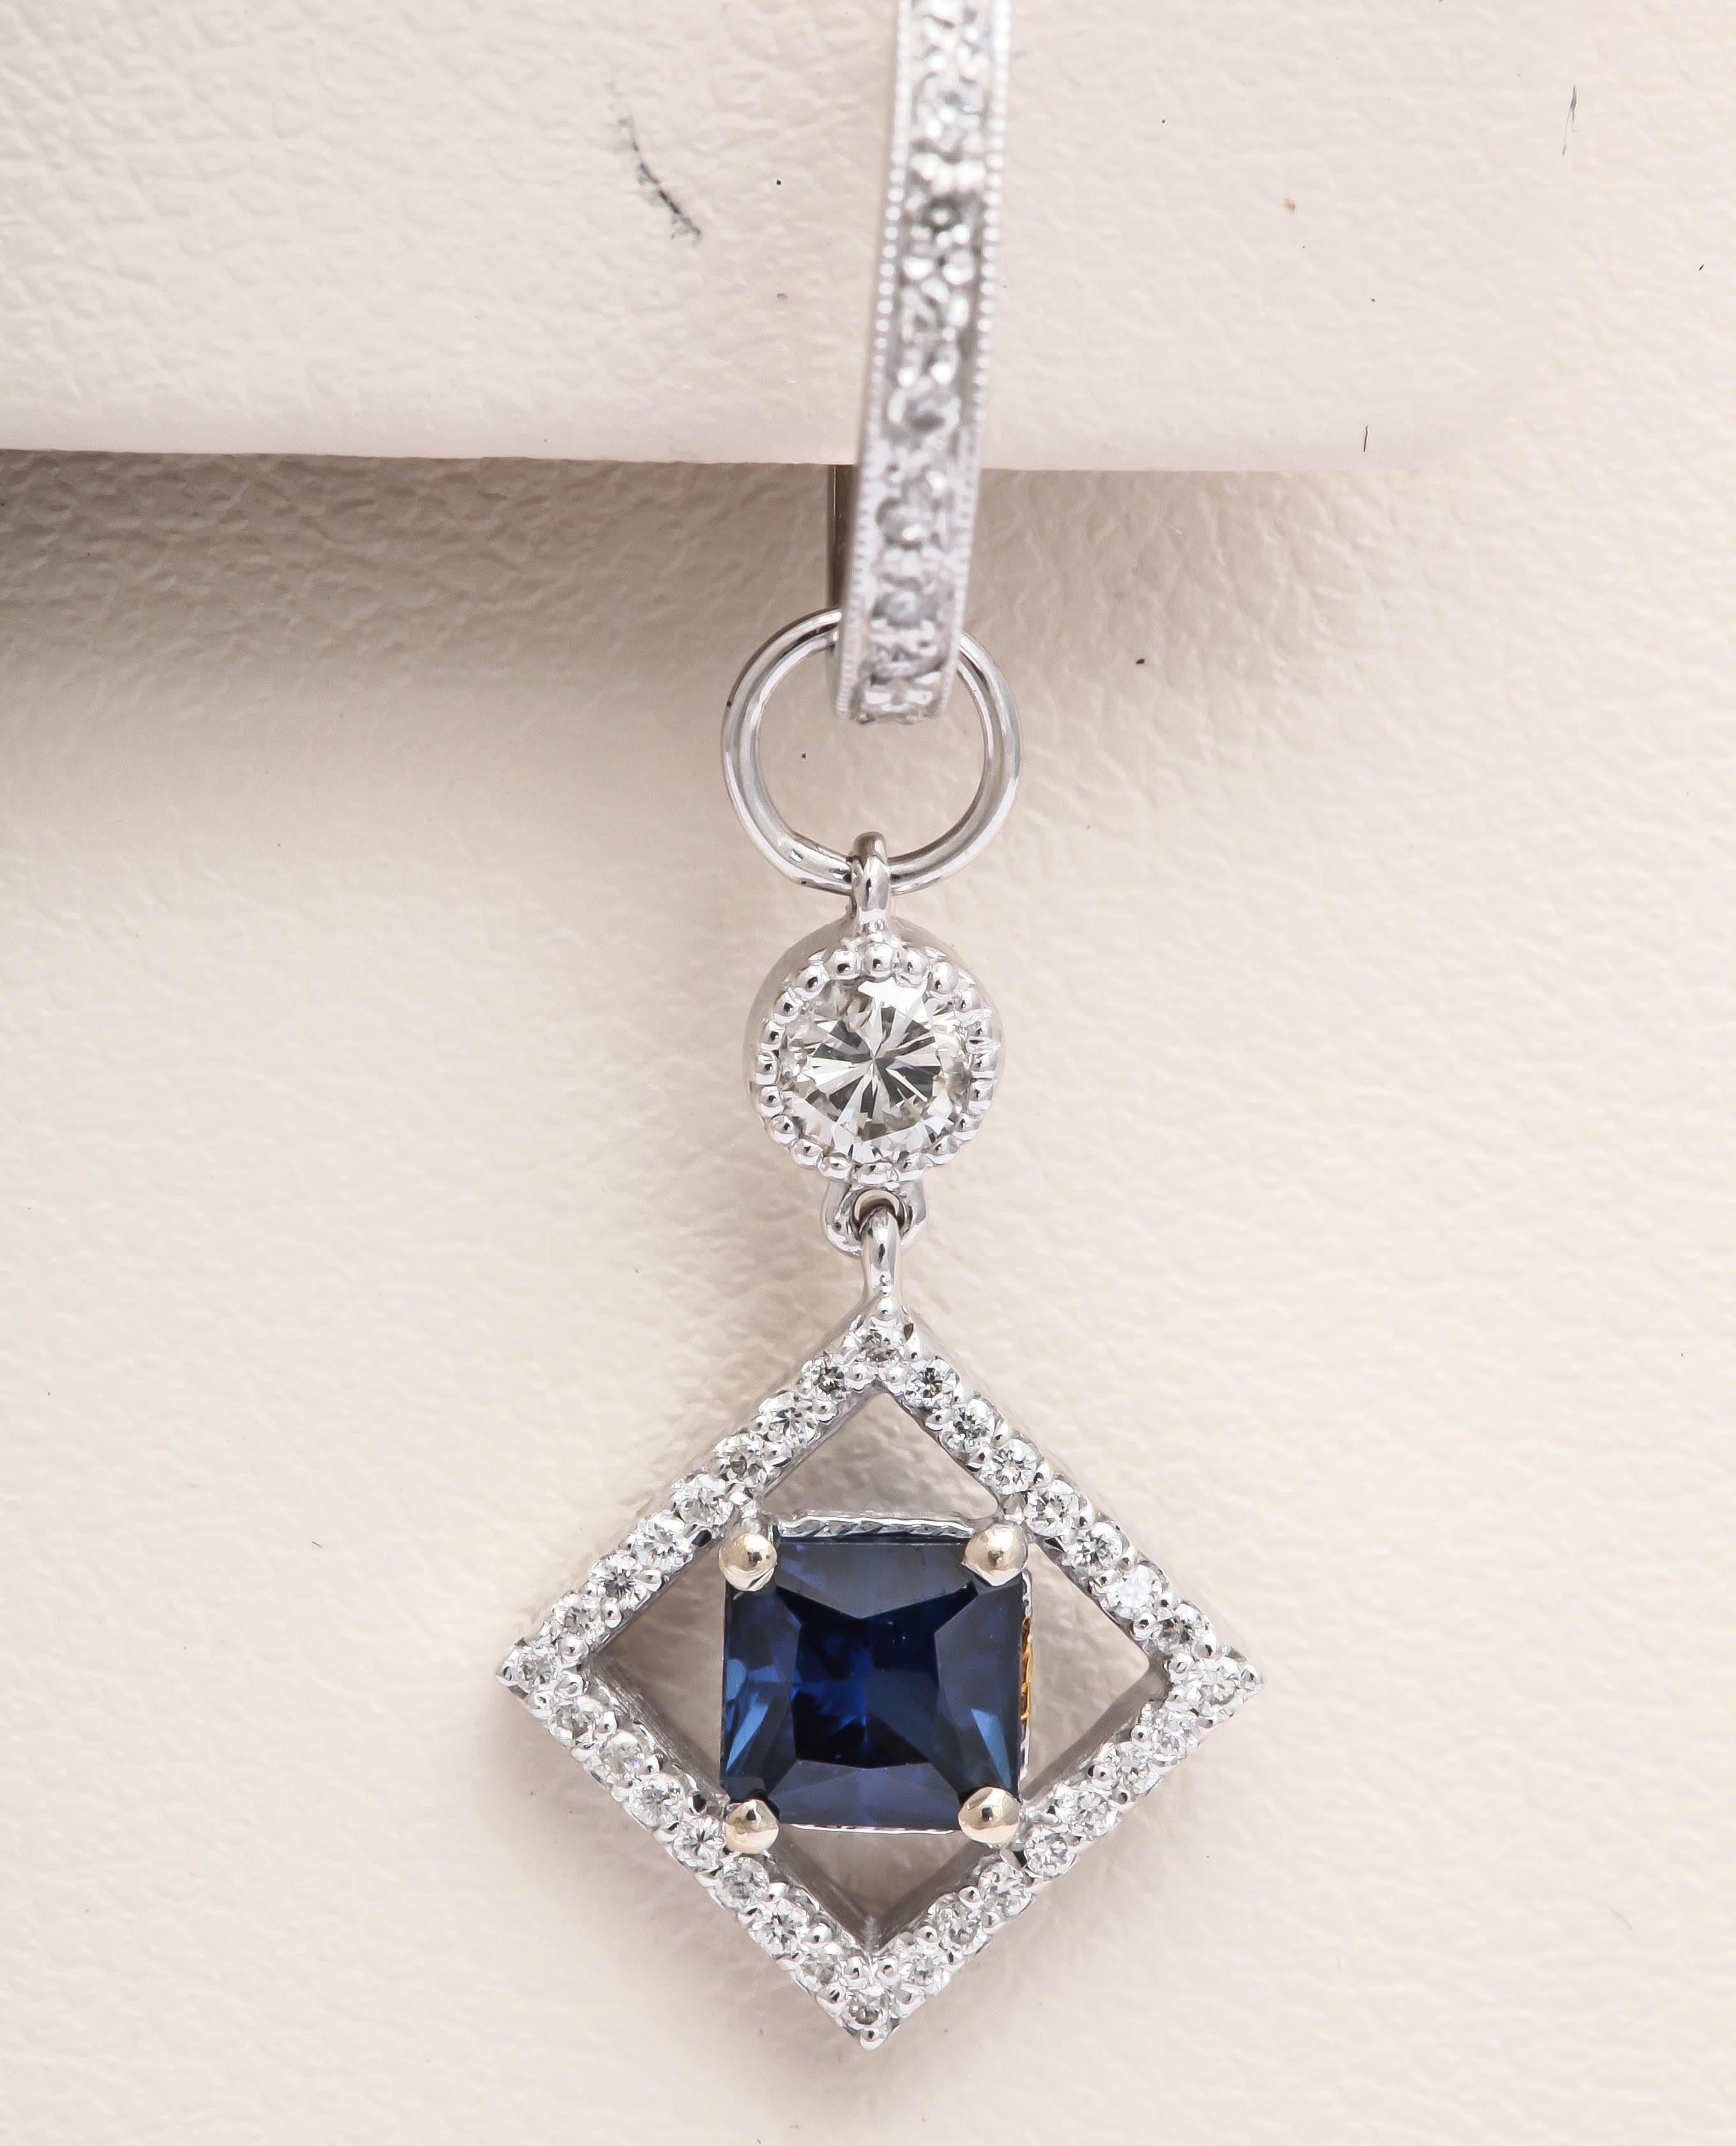 This set of earrings consist of huggies  and a charm. These charms are a micropave set square frame featuring a cushion cut blue sapphire. The charm connects to the huggie with a loop and a bezel set diamond. The huggie can be worn alone. The charms